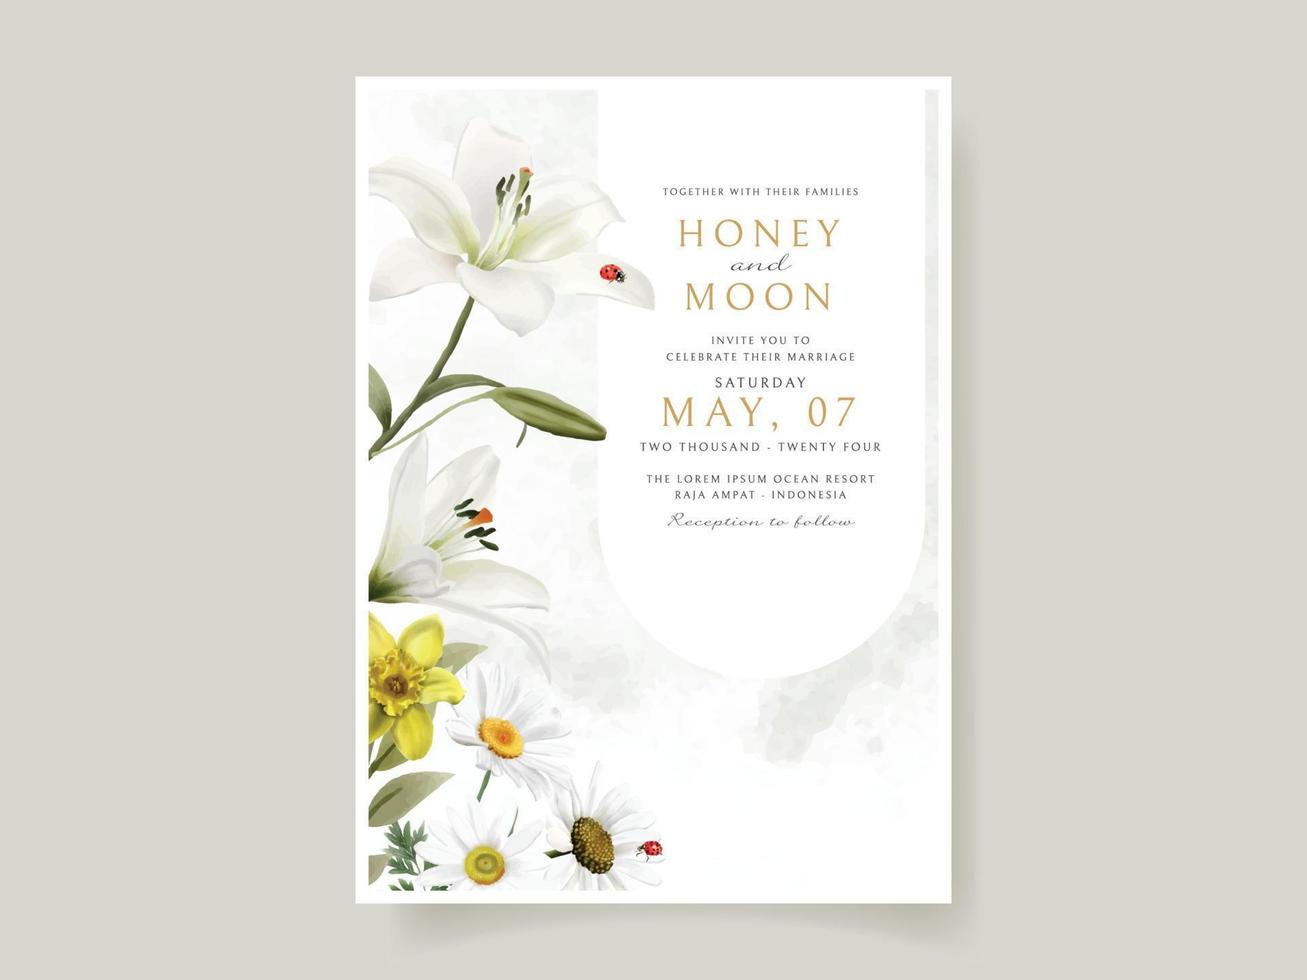 Beautiful floral and ladybugs wedding invitation card vector